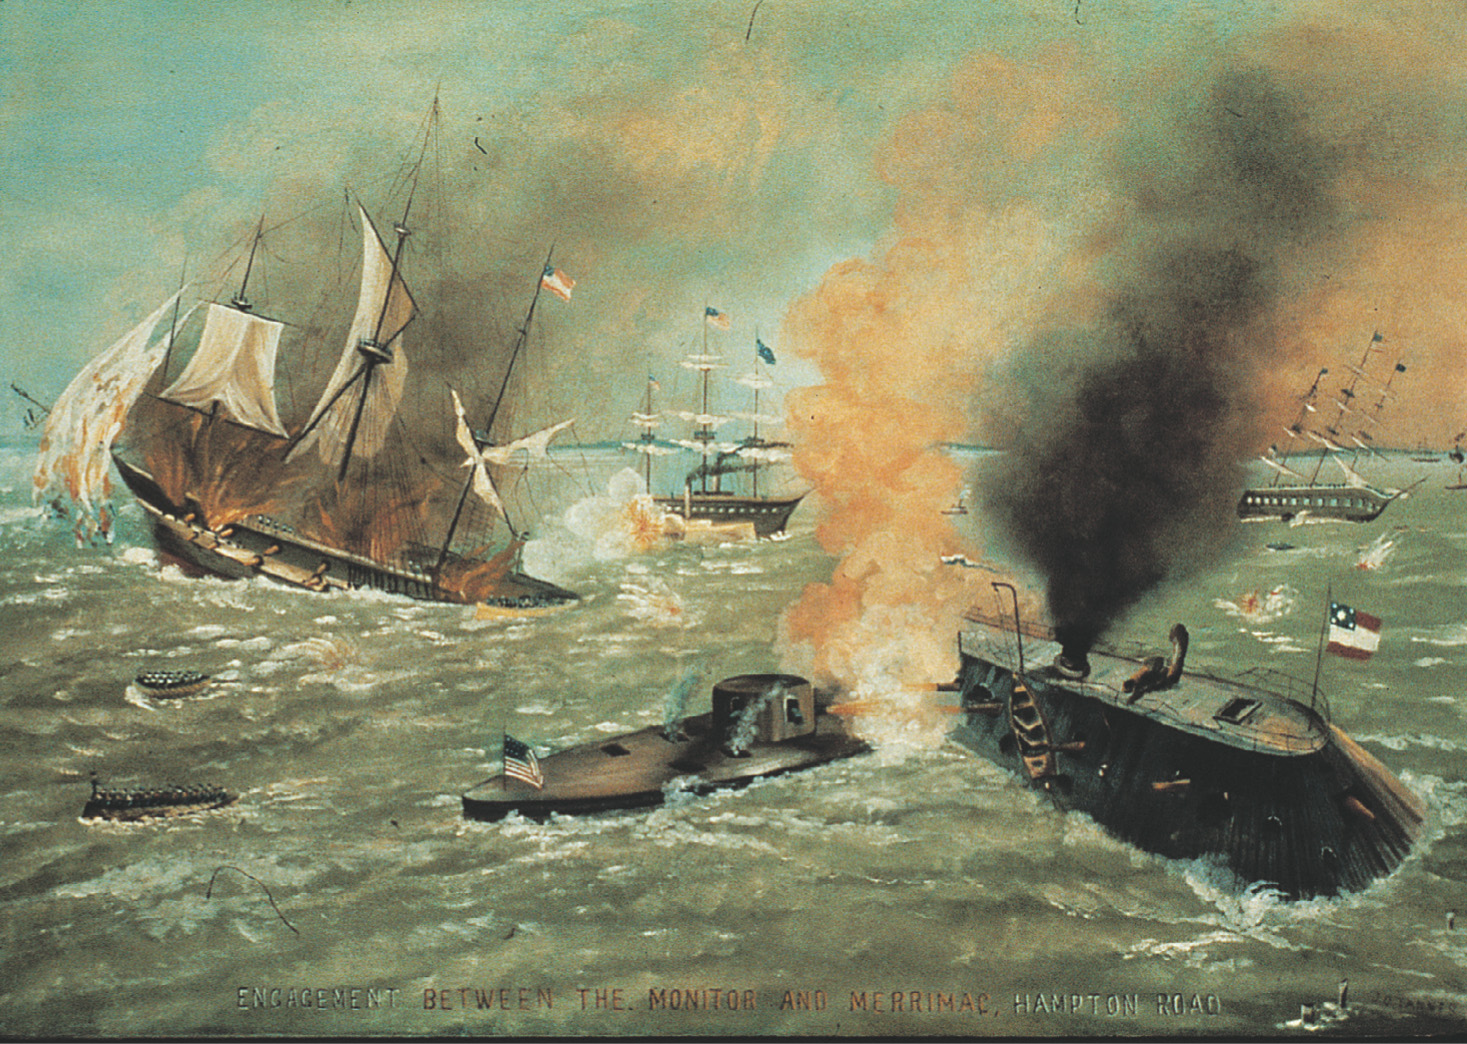 A painting: the iron-covered ships the Monitor and the Merrimack fire at one another in a sea battle. Nearby, a wooden sailing ship sinks.